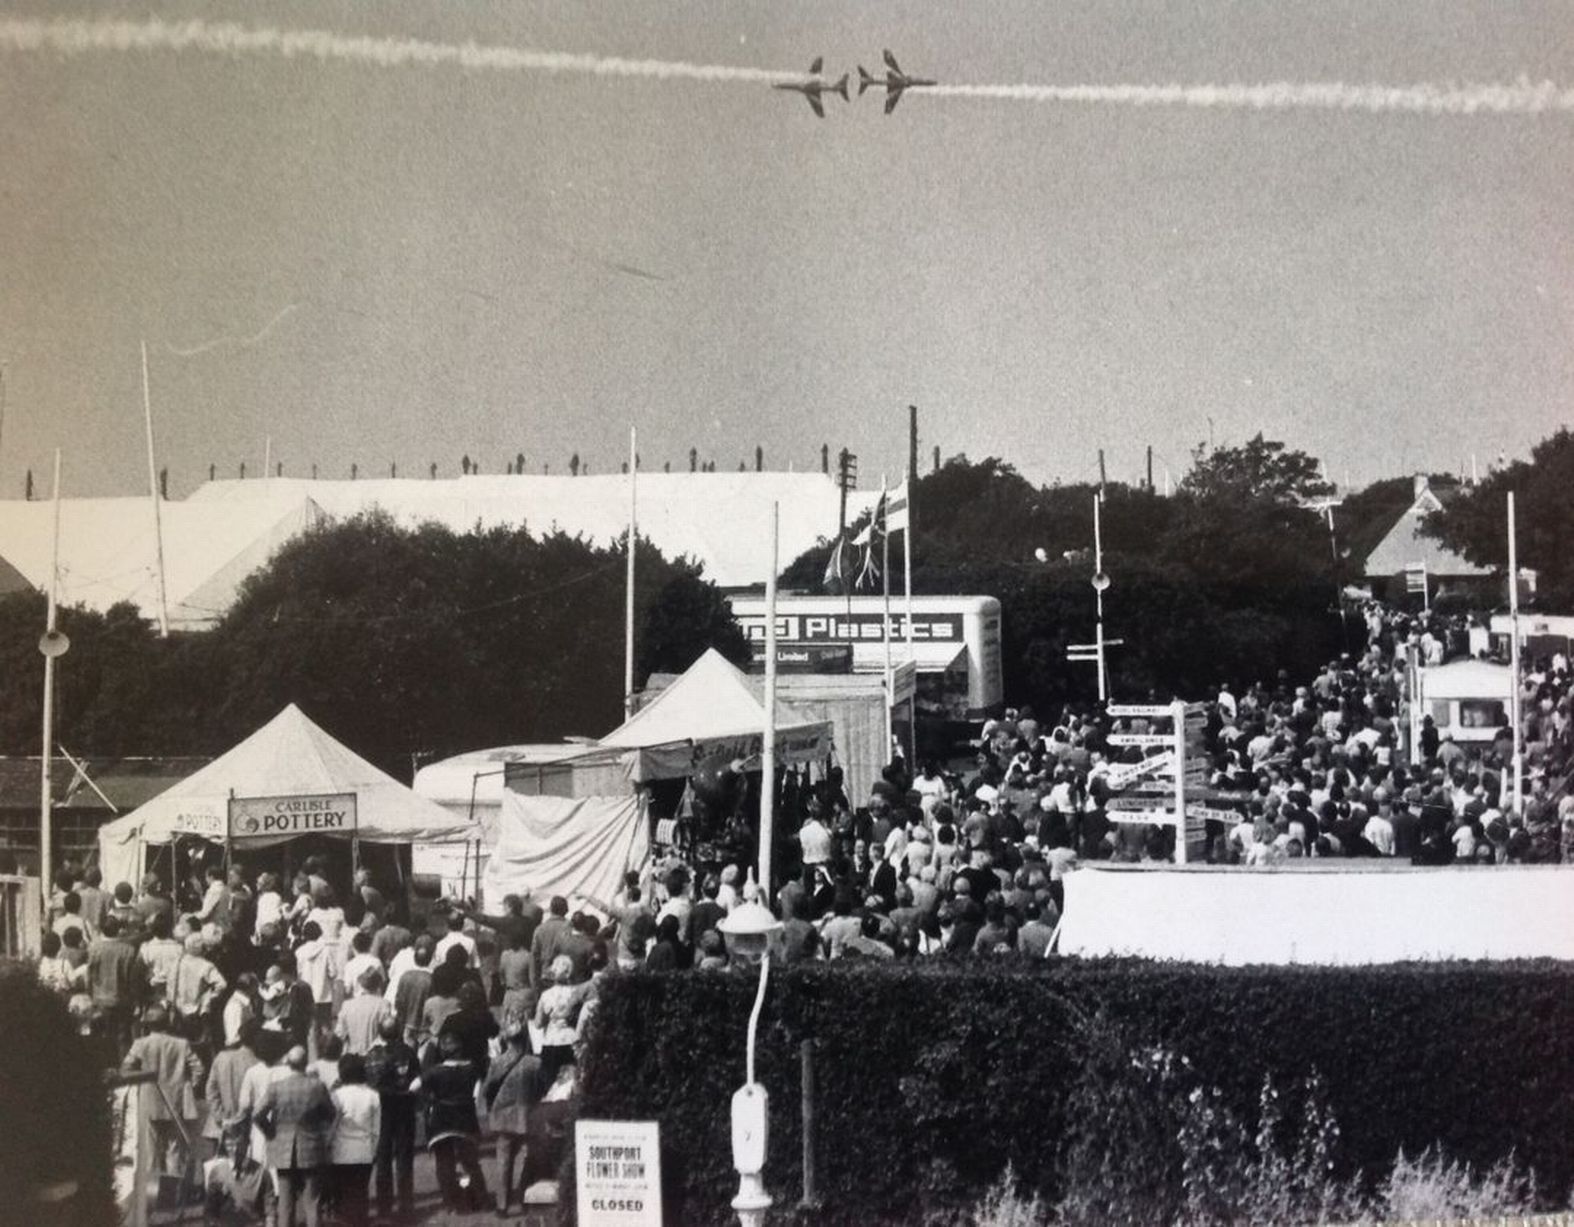 The Red Arrows perform daredevil aerobatics as crowds pack into Victoria Park in Southport for the 1980 Southport Flower Show